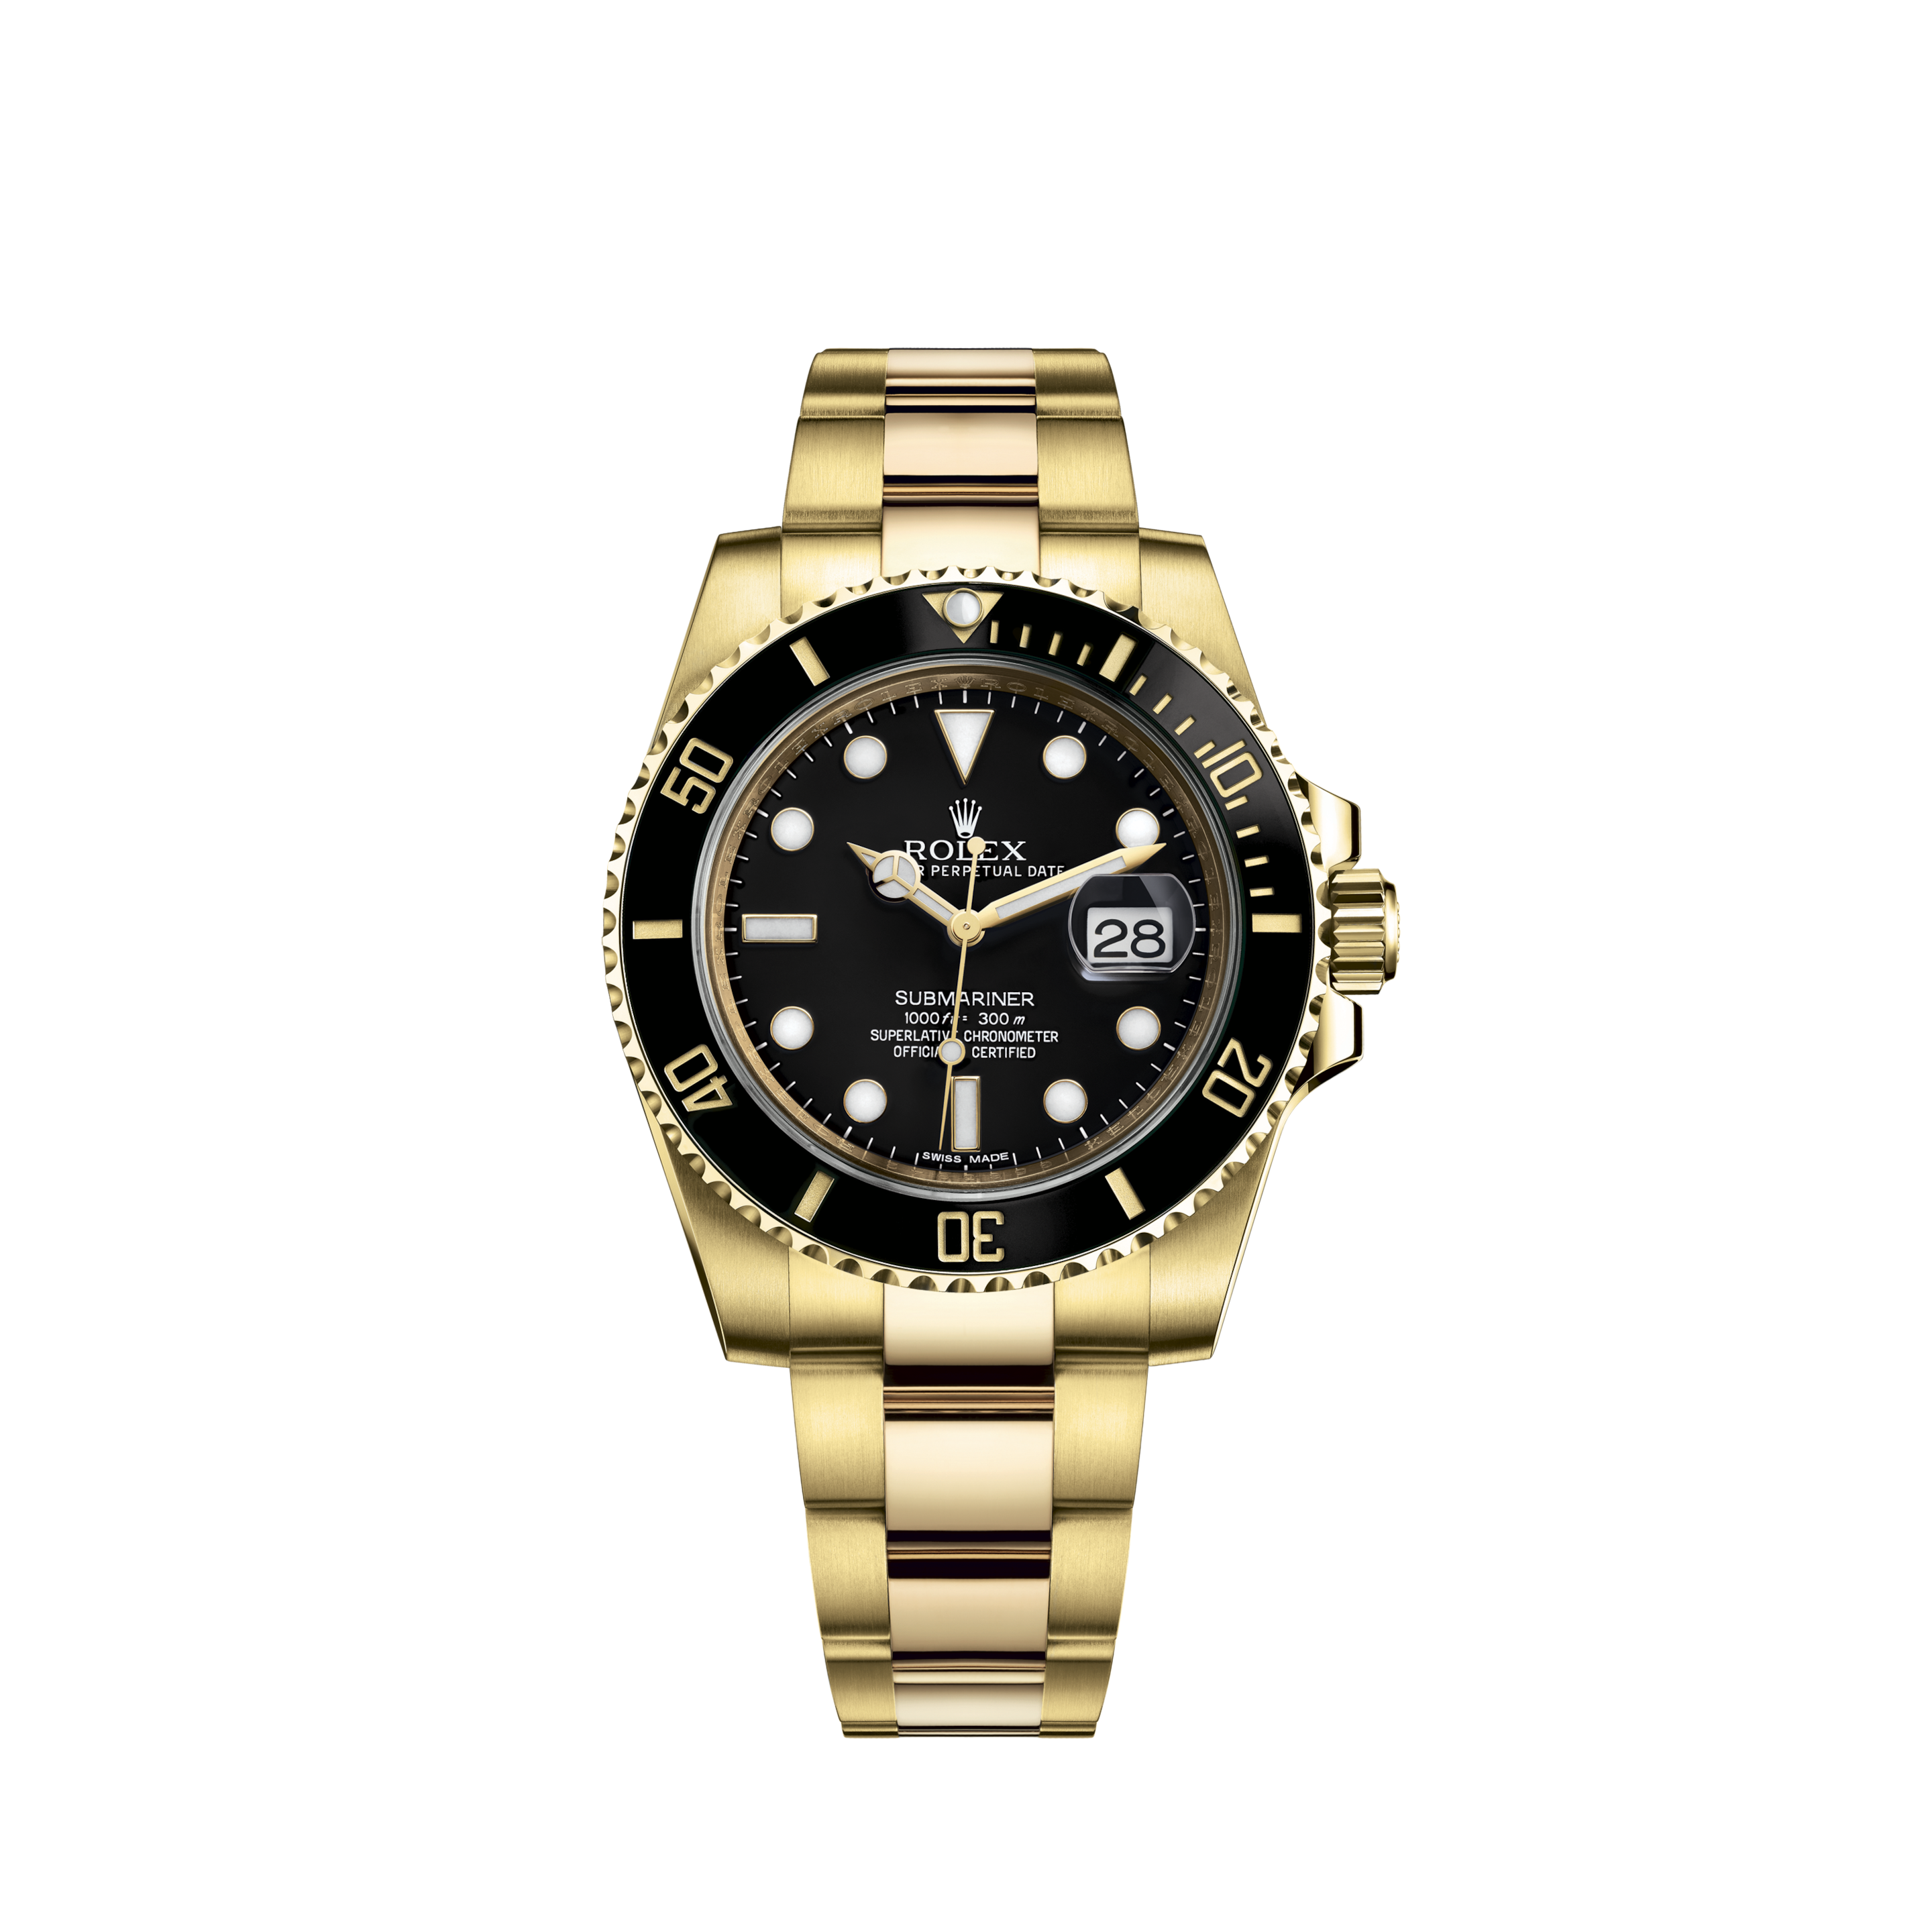 Rolex 5513 Submariner Glossy Dial